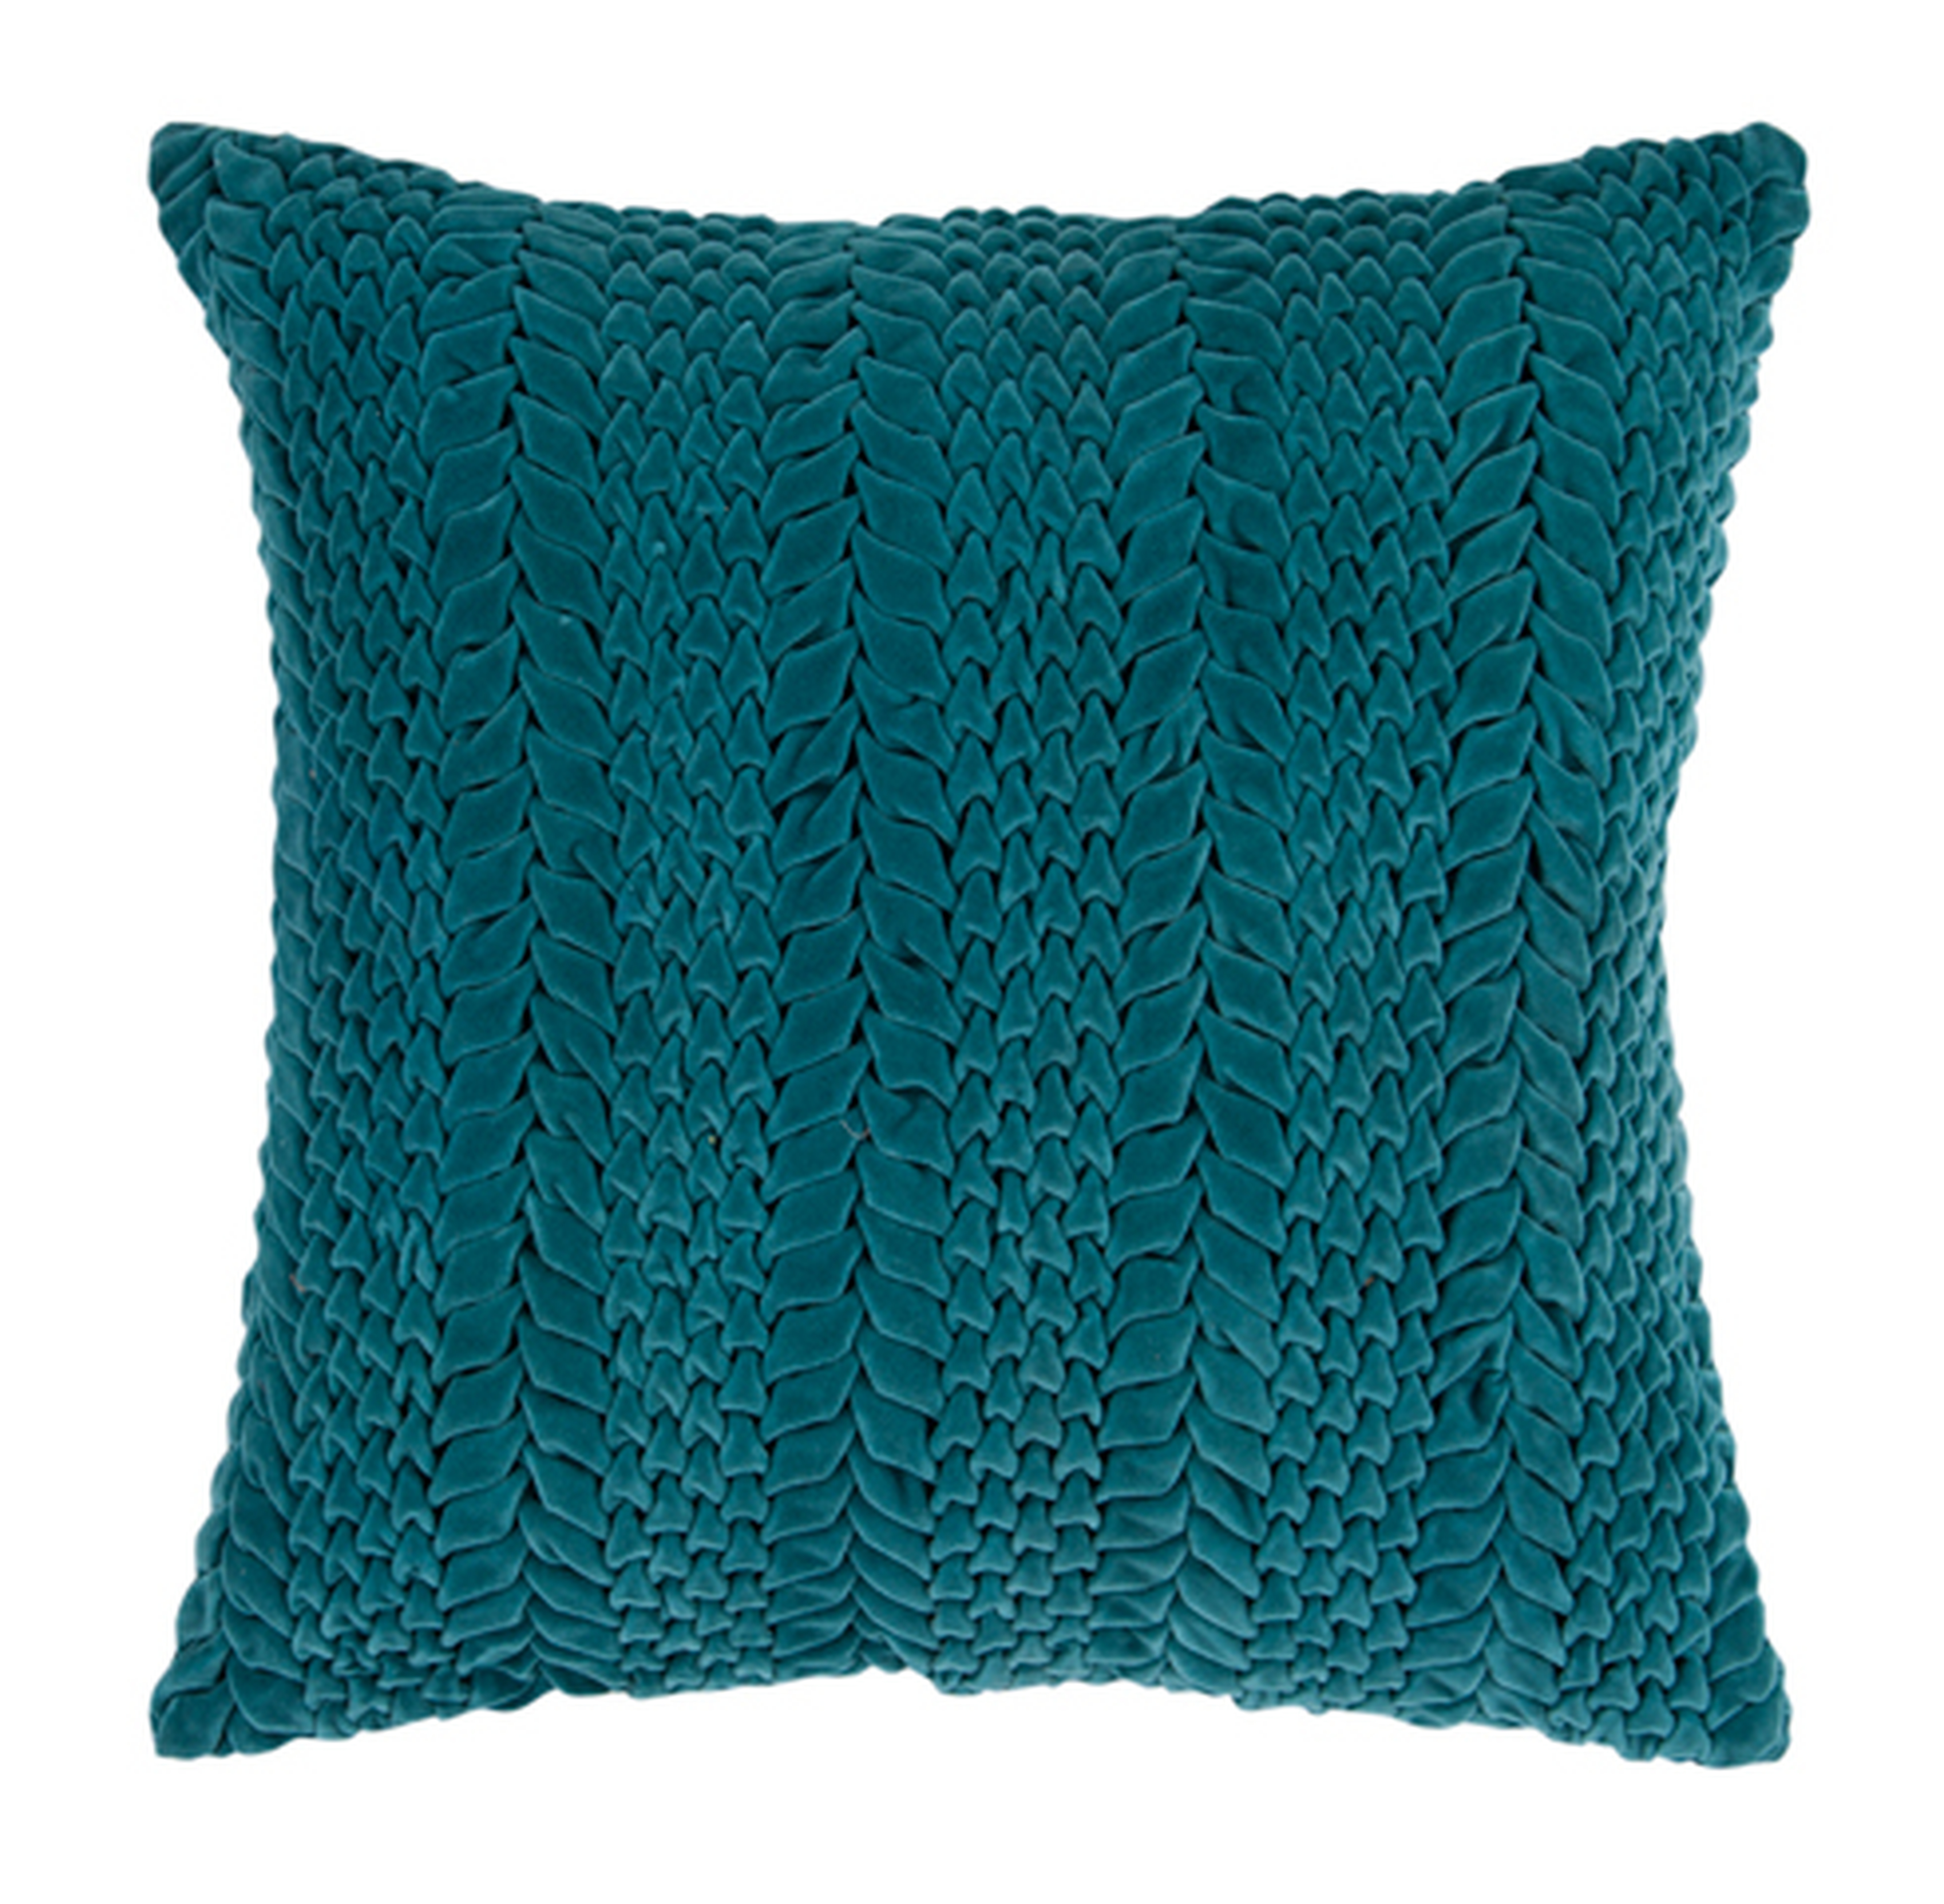 Edie Hollywood Regency Cotton Velvet Down Teal Pillow - 18x18 - Kathy Kuo Home